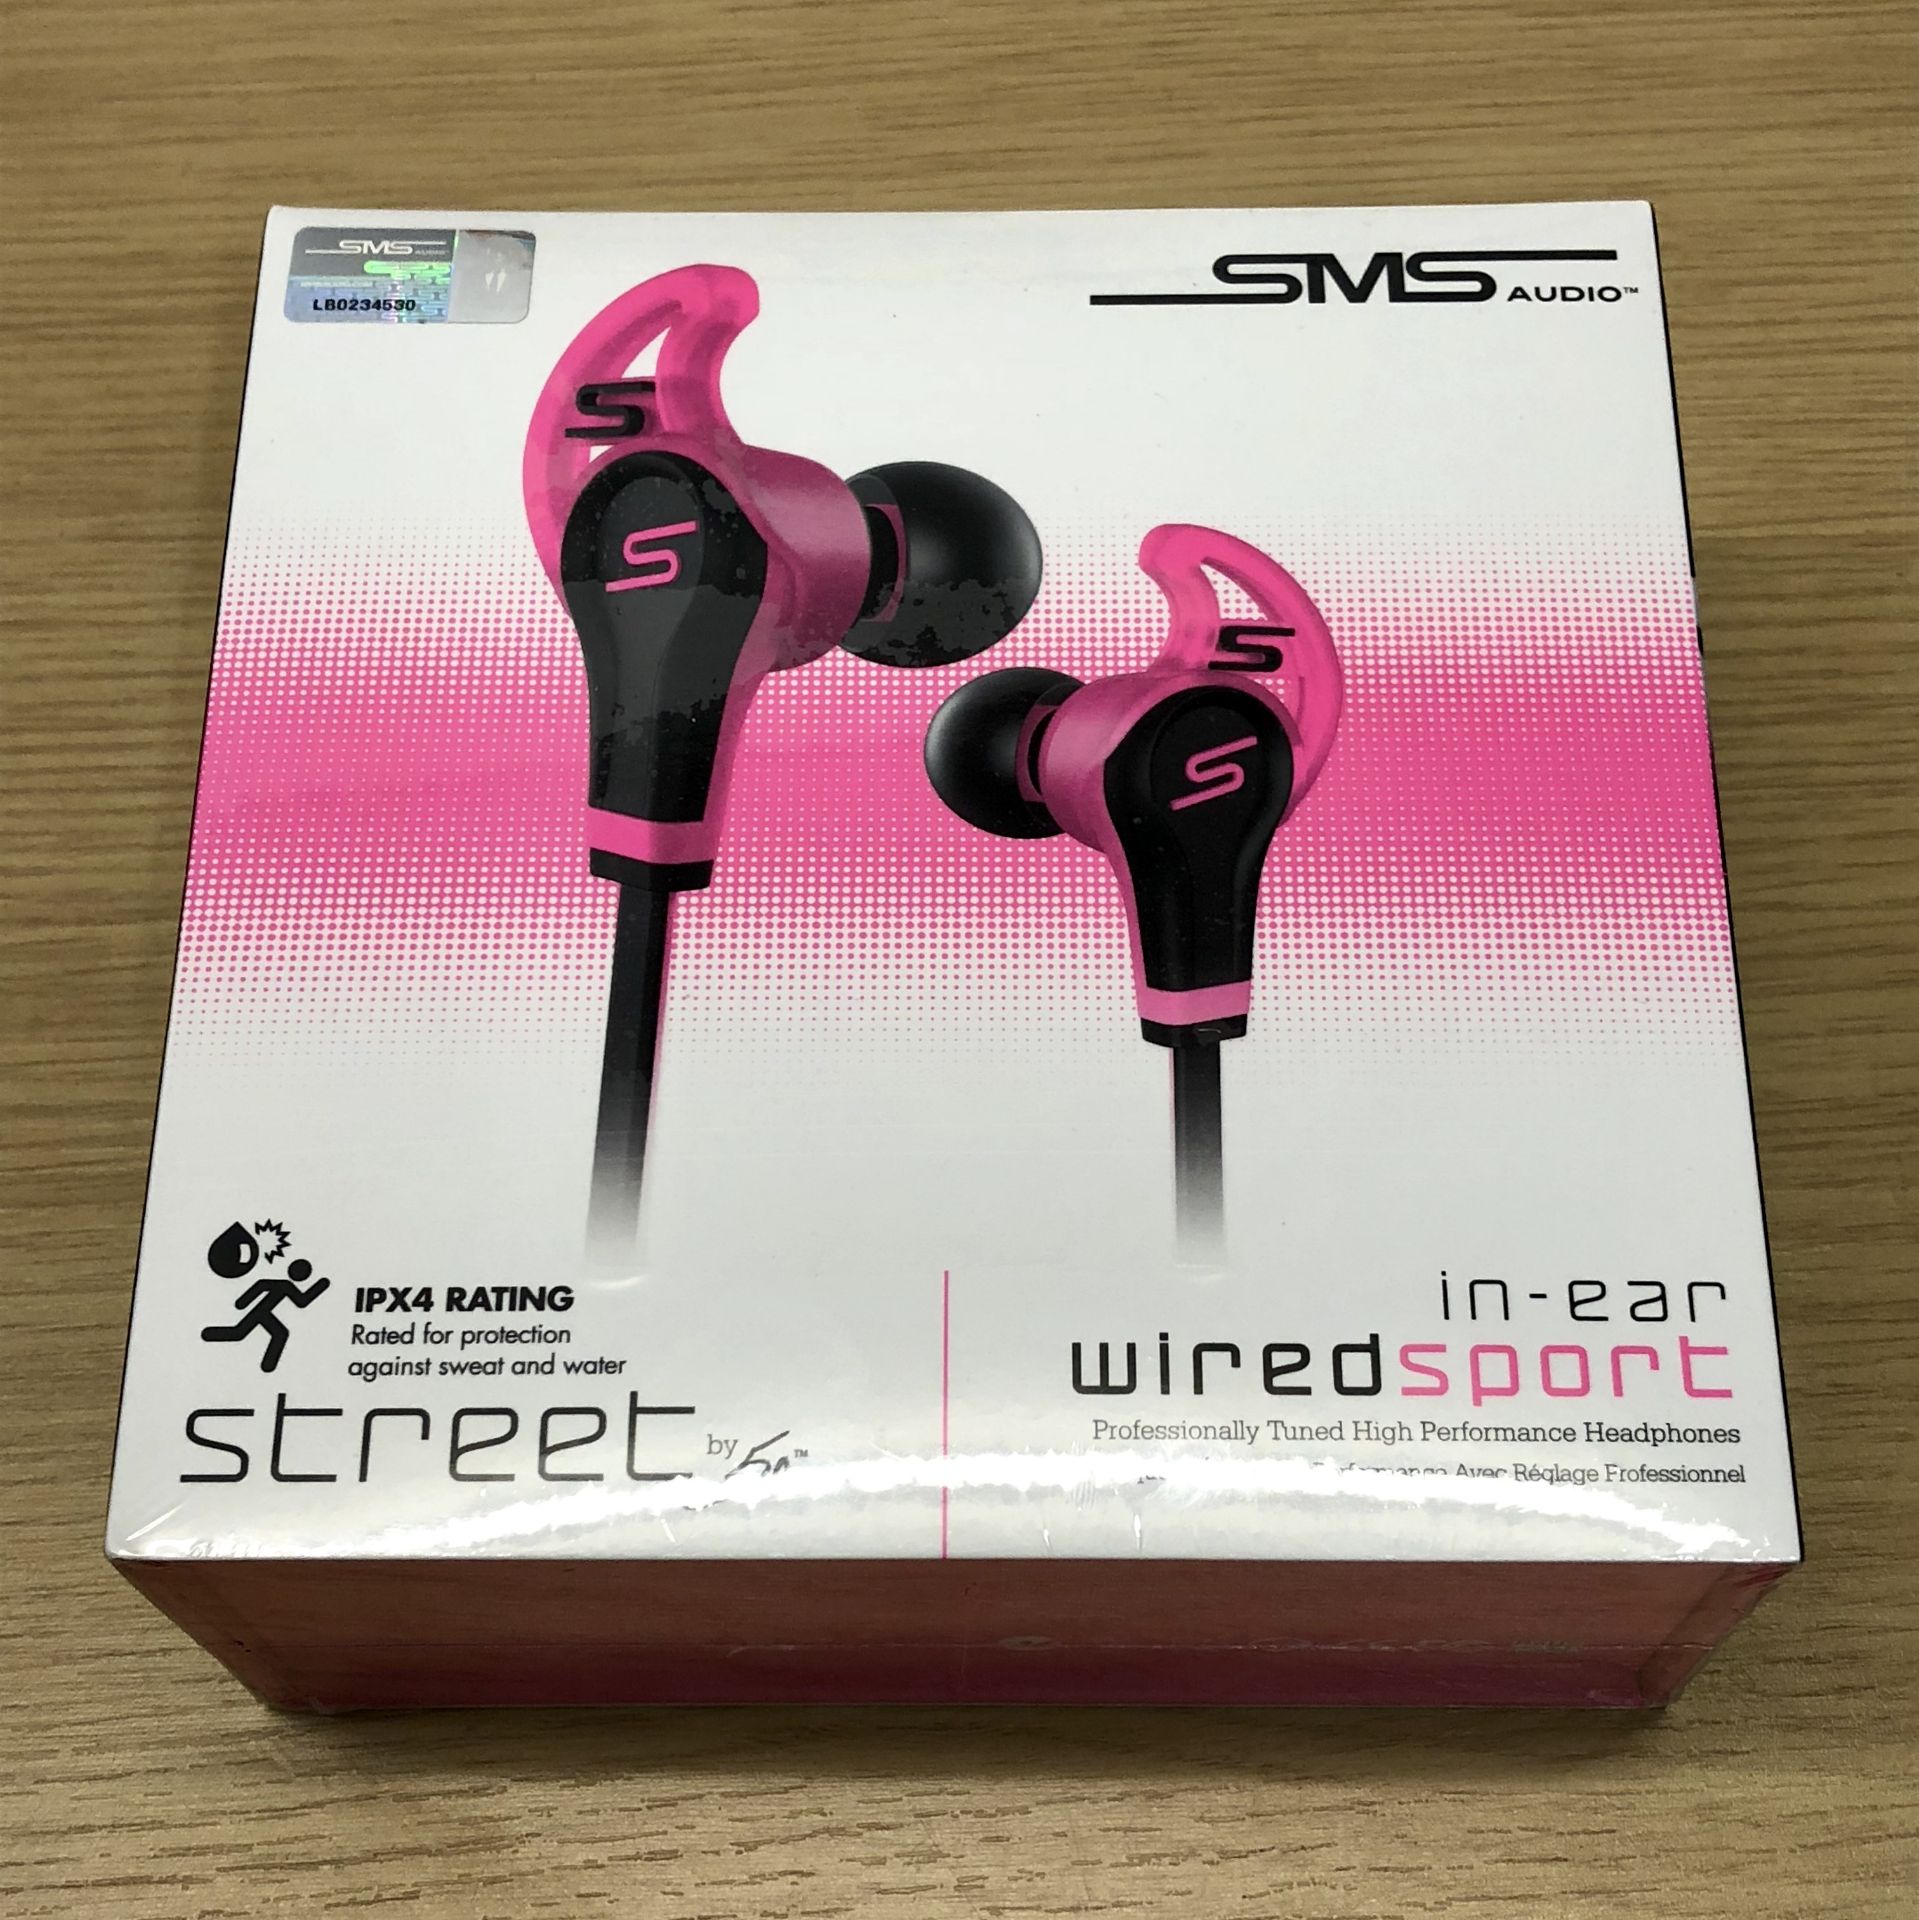 V Brand New SMS Audio Street By 50 Cent Sport Earphones - RRP £59.99 - Professionally Tuned High - Image 2 of 2